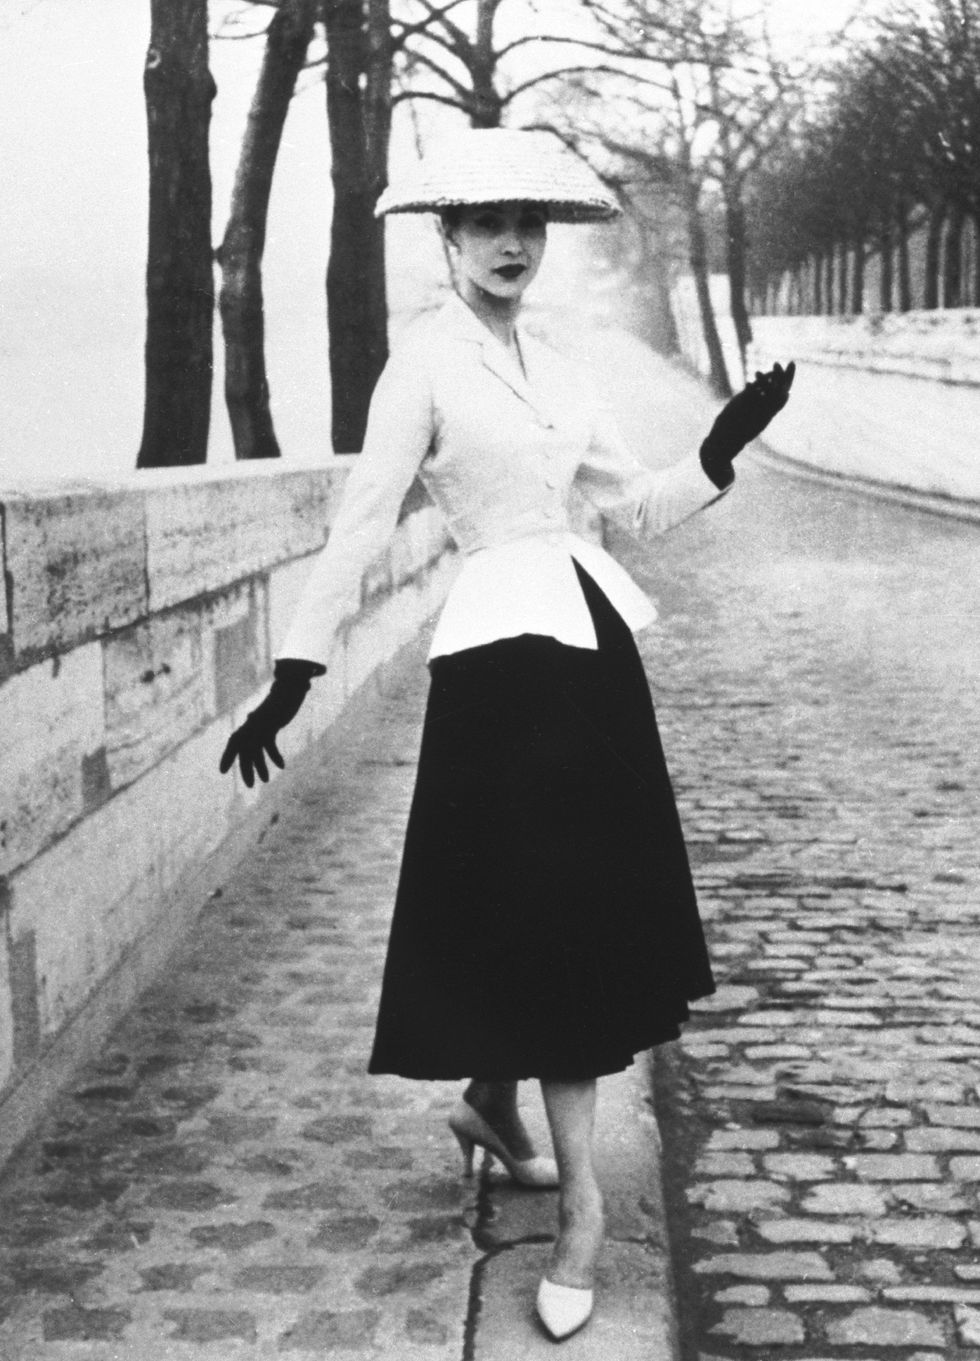 Dior's New Look in 1947